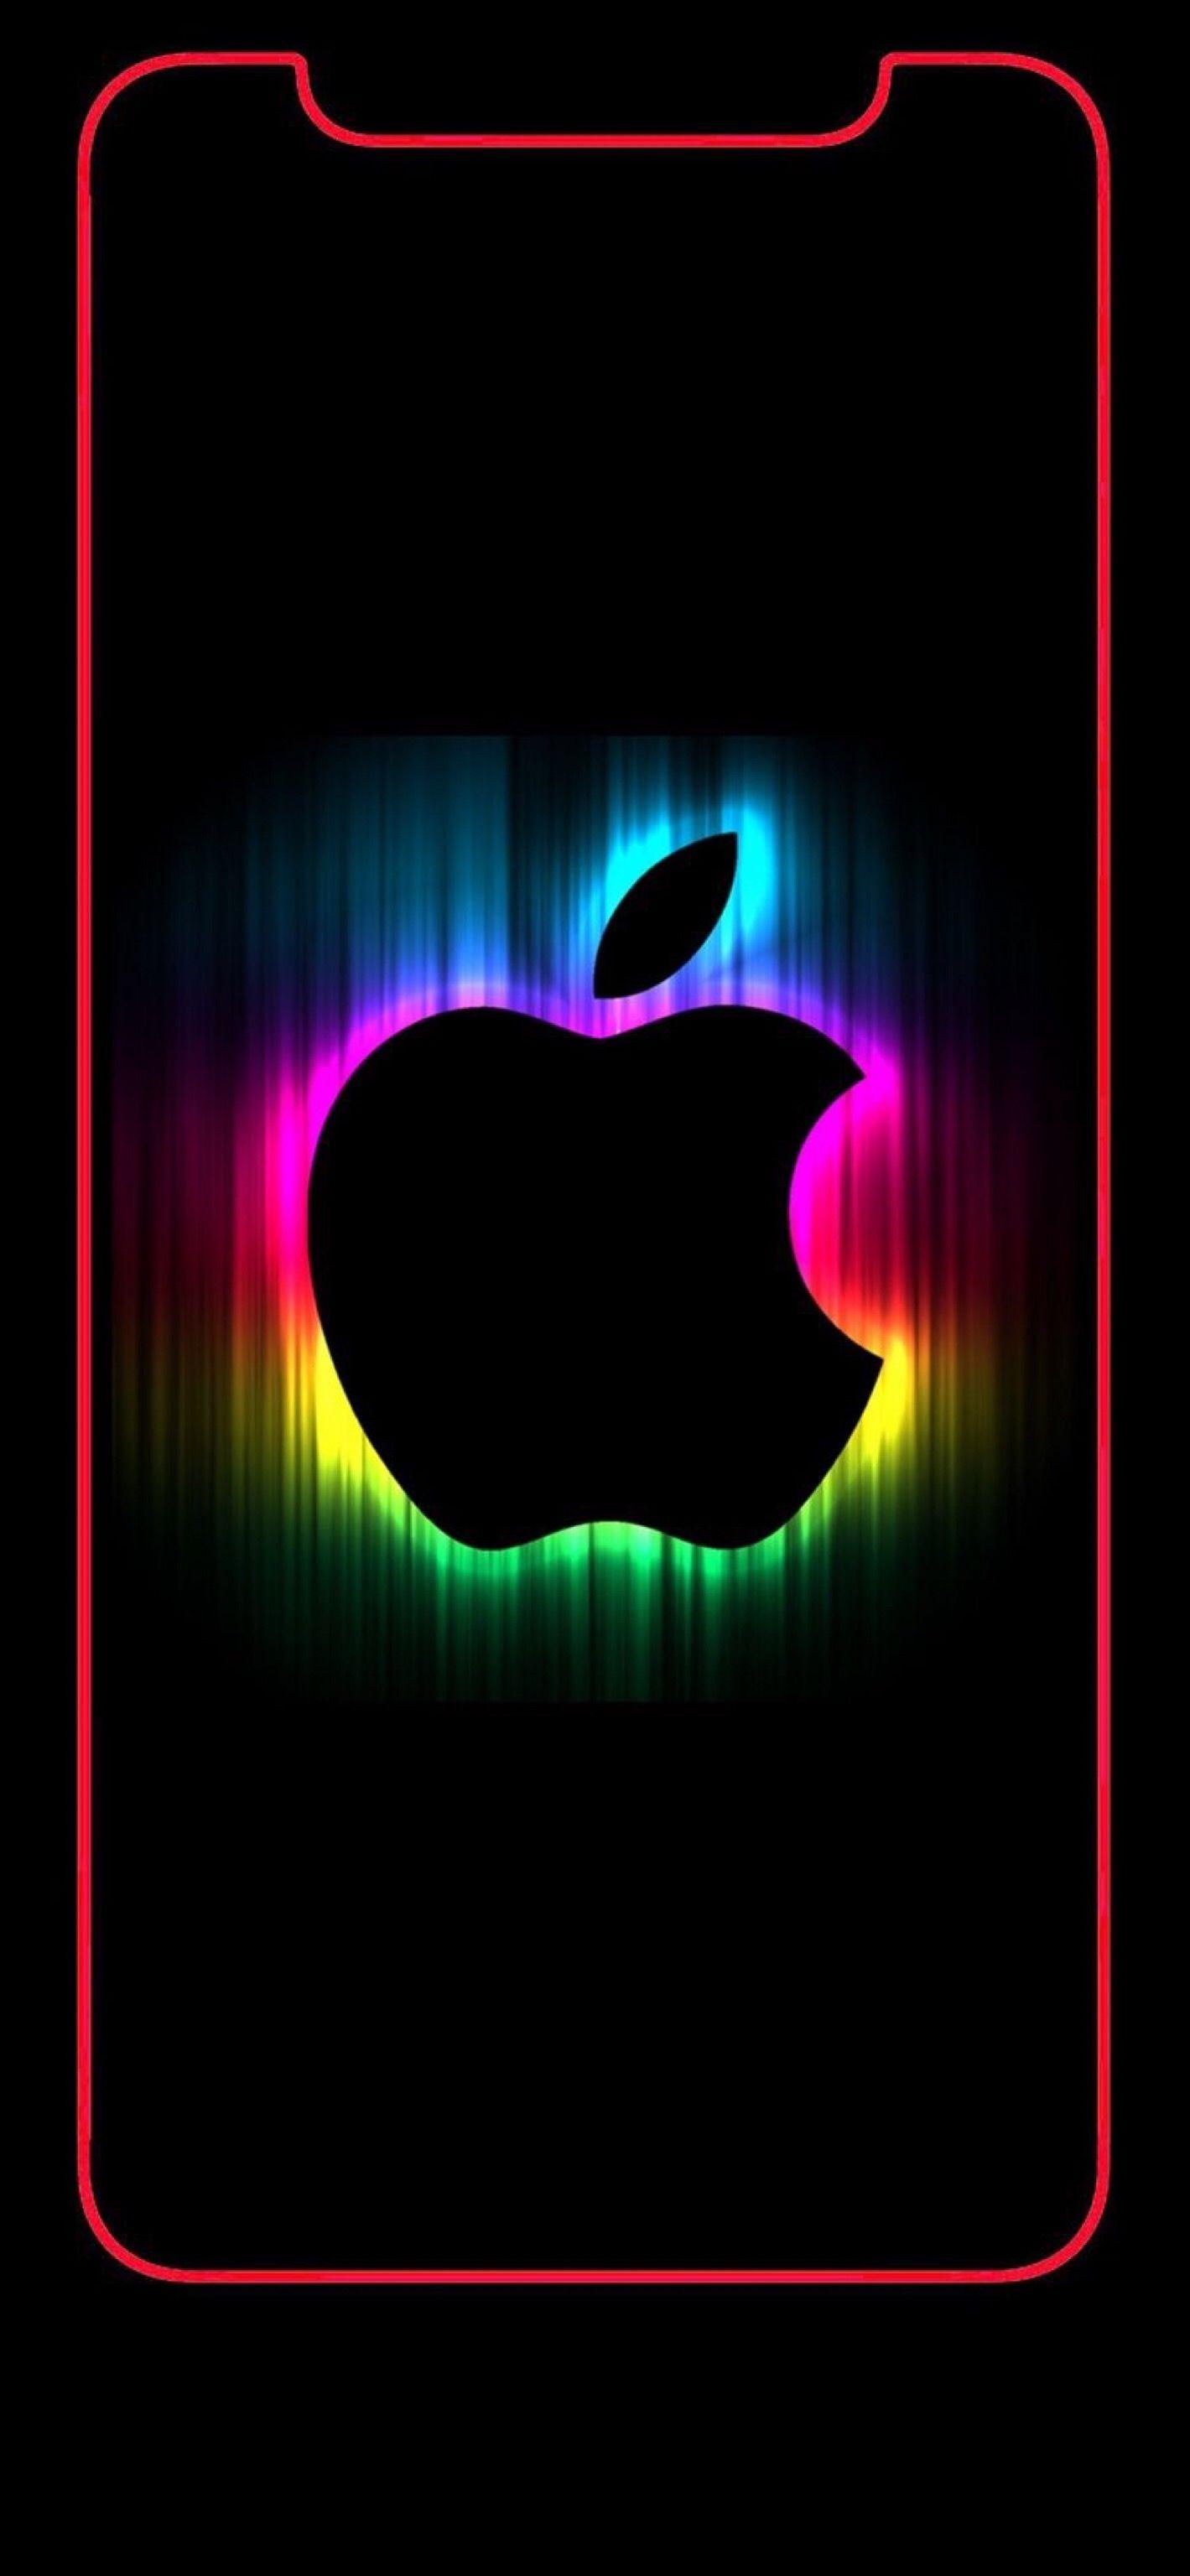 iPhone X Apple Wallpapers - Wallpaper Cave